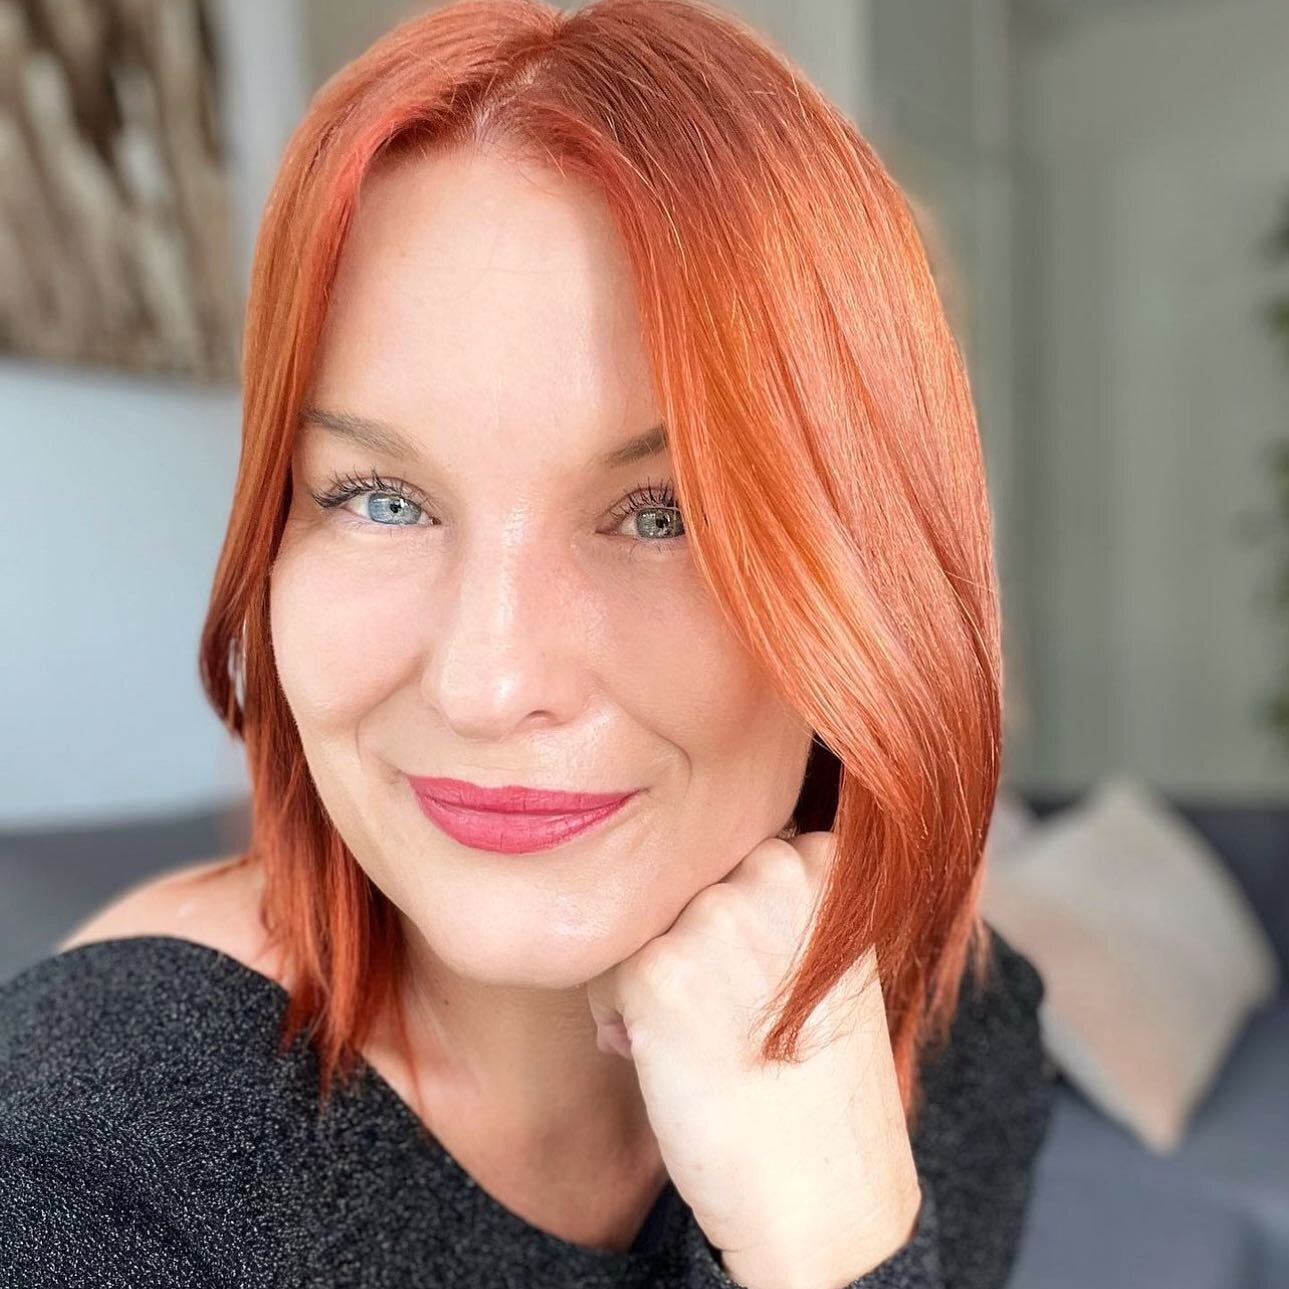 Our favourite copper @beautybossbusiness! Hair by @colstonrobertshair using Color.Me .44 by @kevin.murphy.australia #fuchshair #kevinmurphy #copperhair #copper #haircolor #hairtrends #sydneyhair #sydneyhairdresser